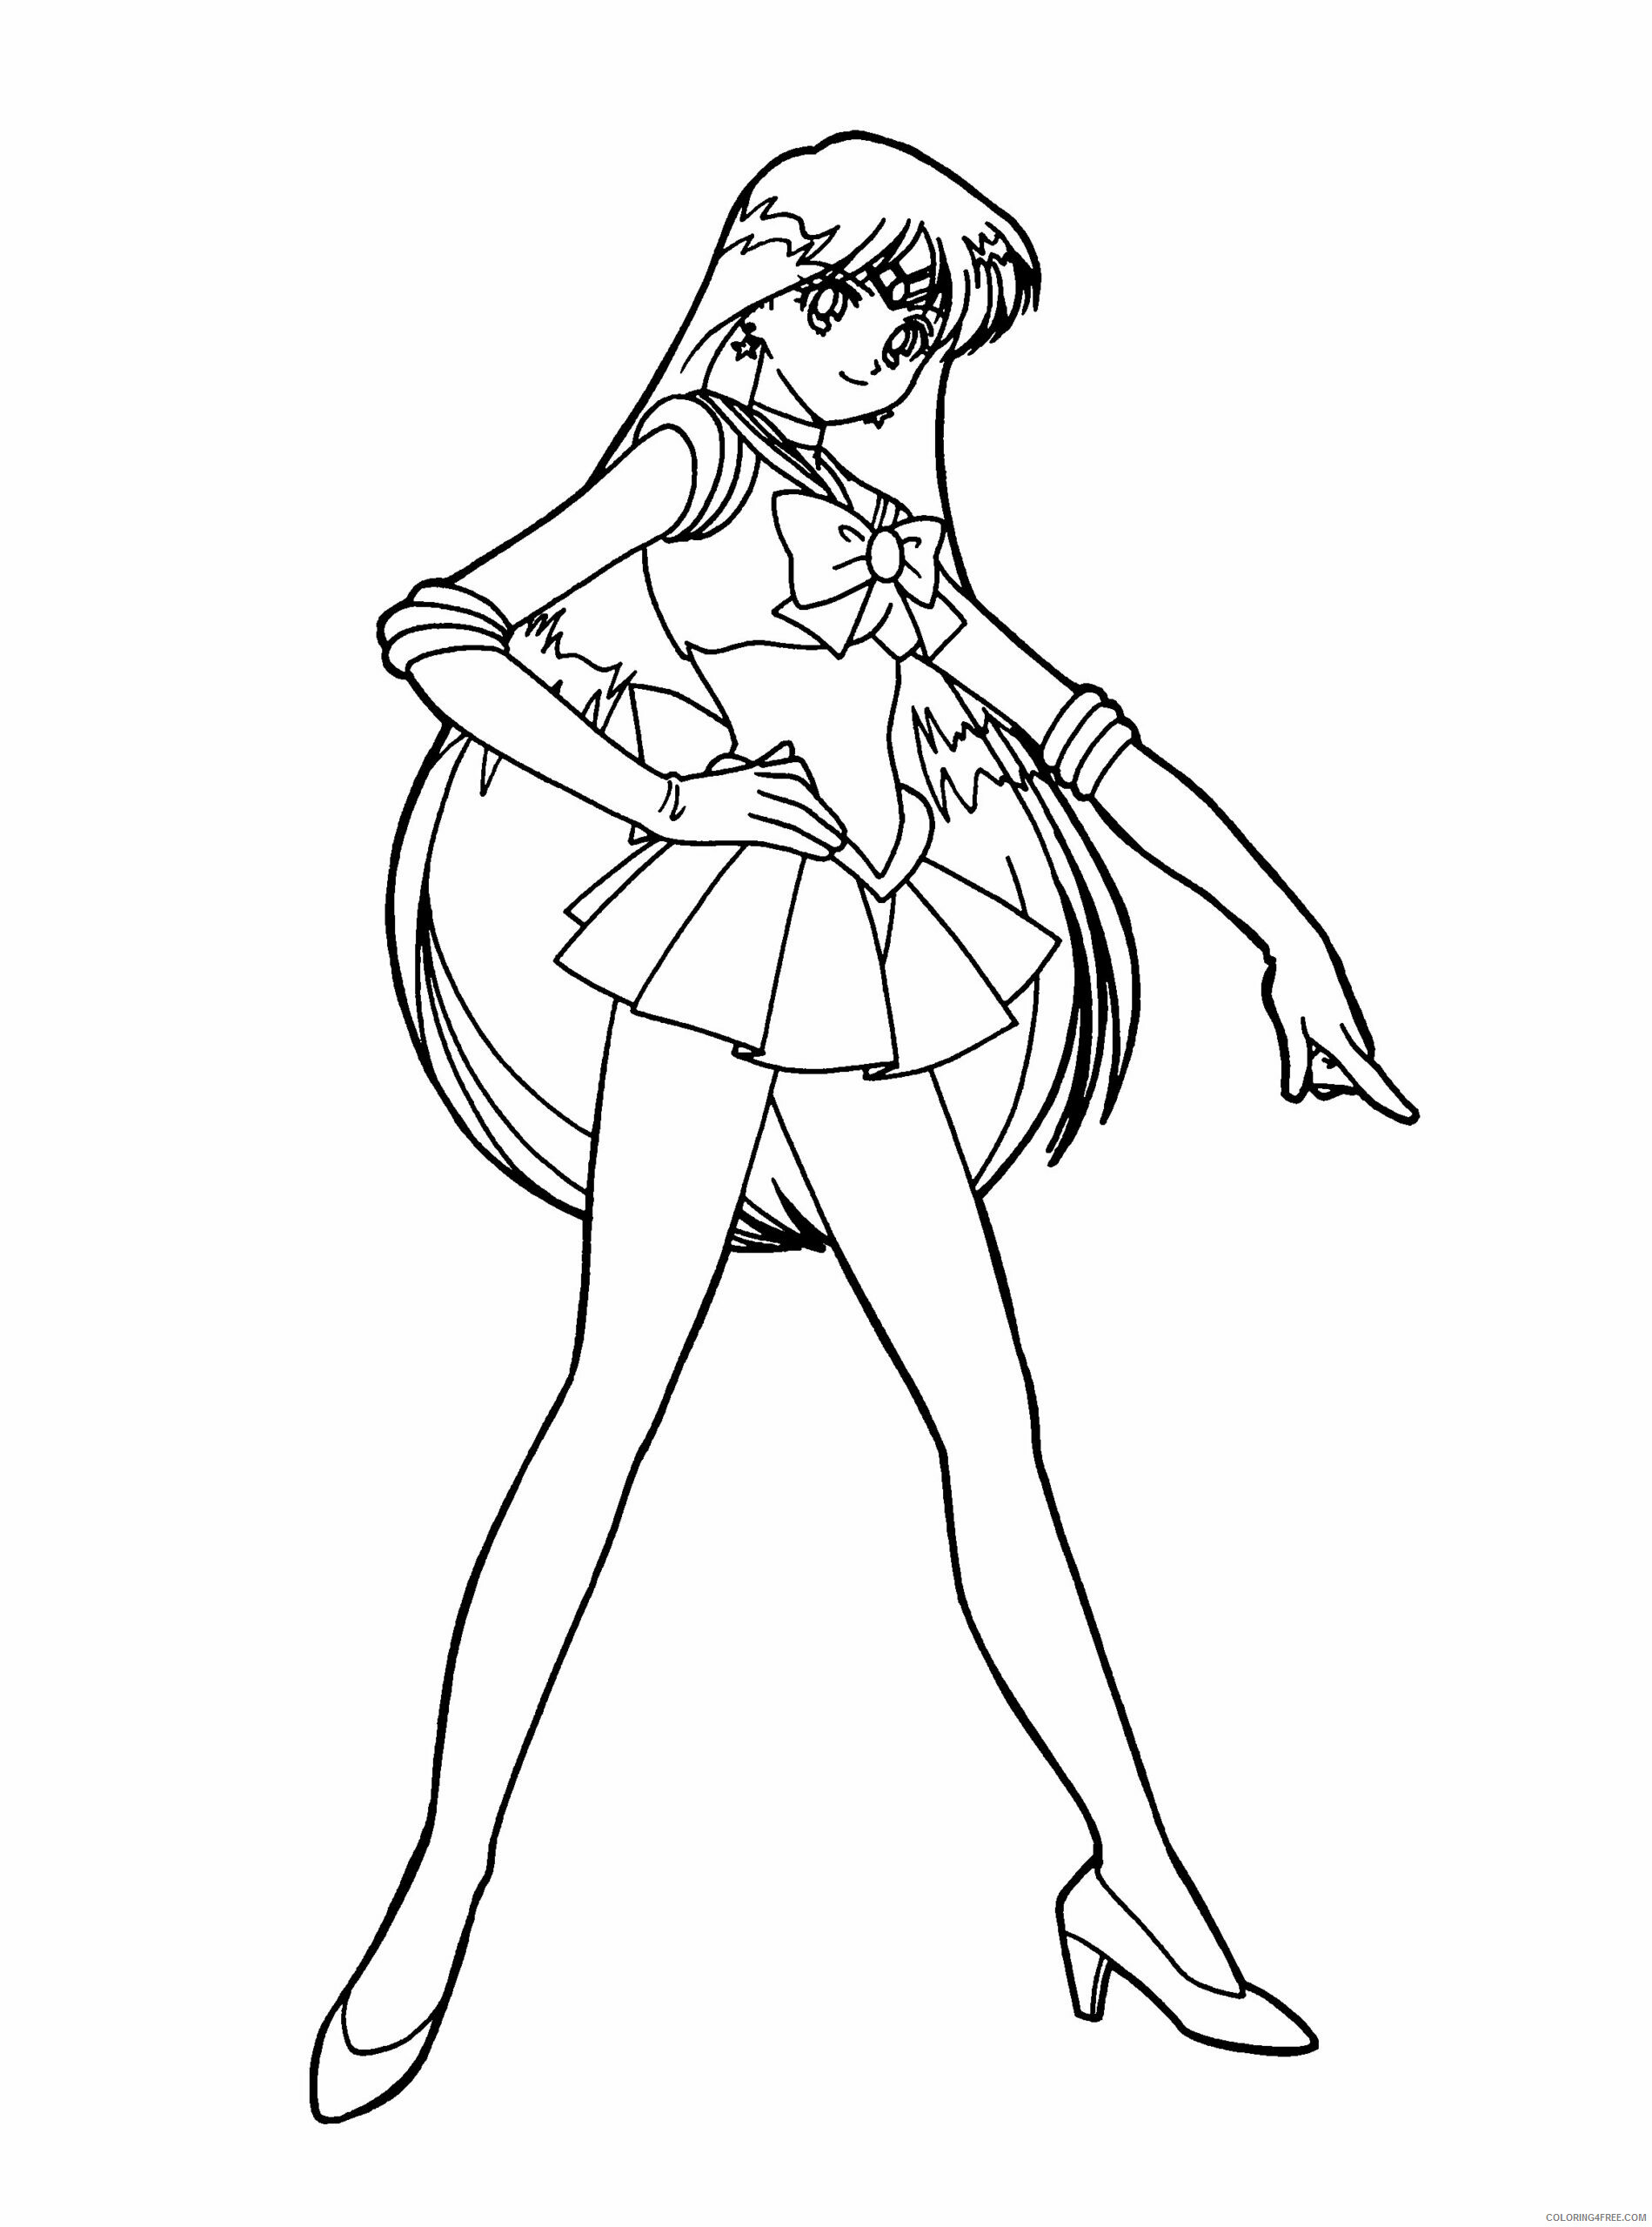 Sailor Moon Printable Coloring Pages Anime sailormoon EOywc 2021 0986 Coloring4free